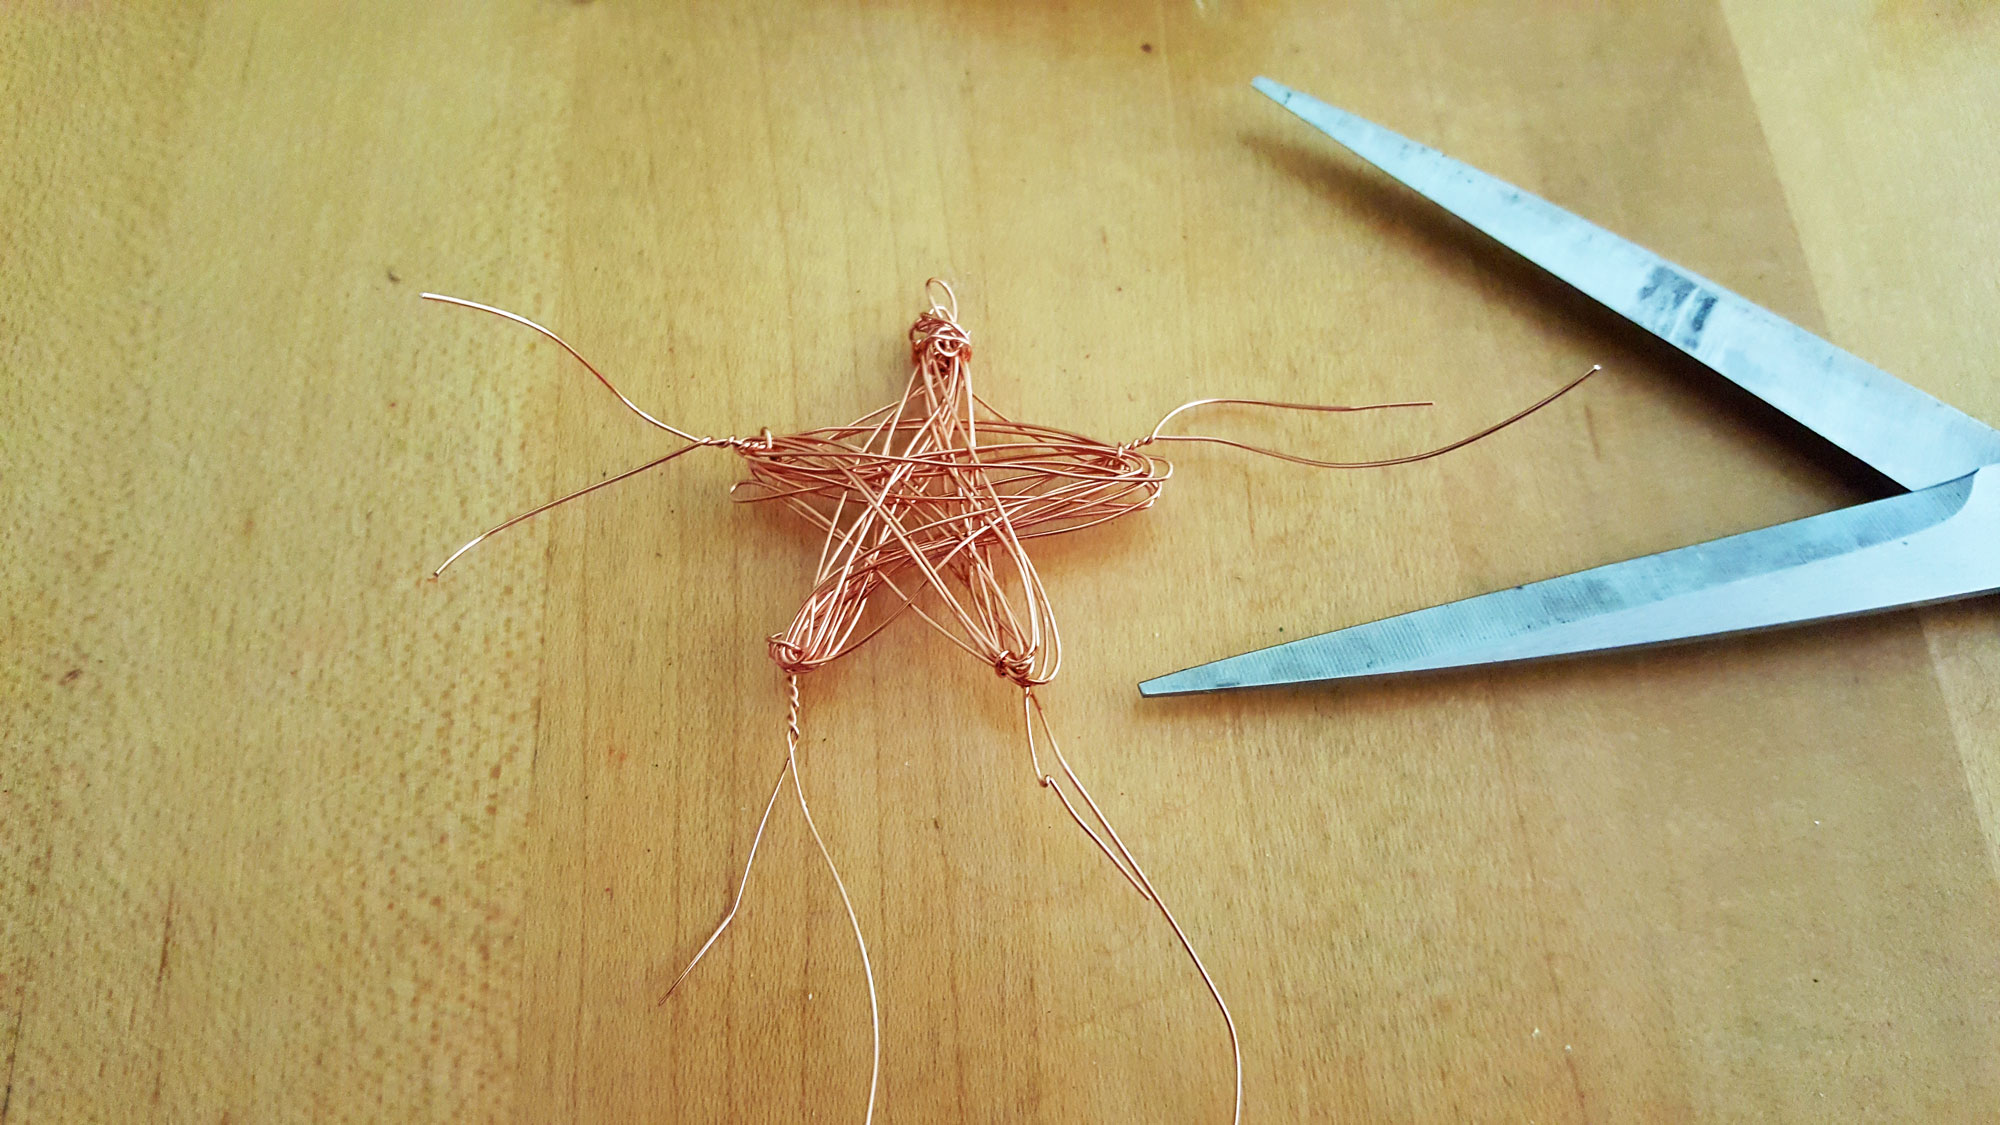 Step 4 is to remove the nails and slide the star off. Cut and twist the wire ends into the star | OrnamentShop.com